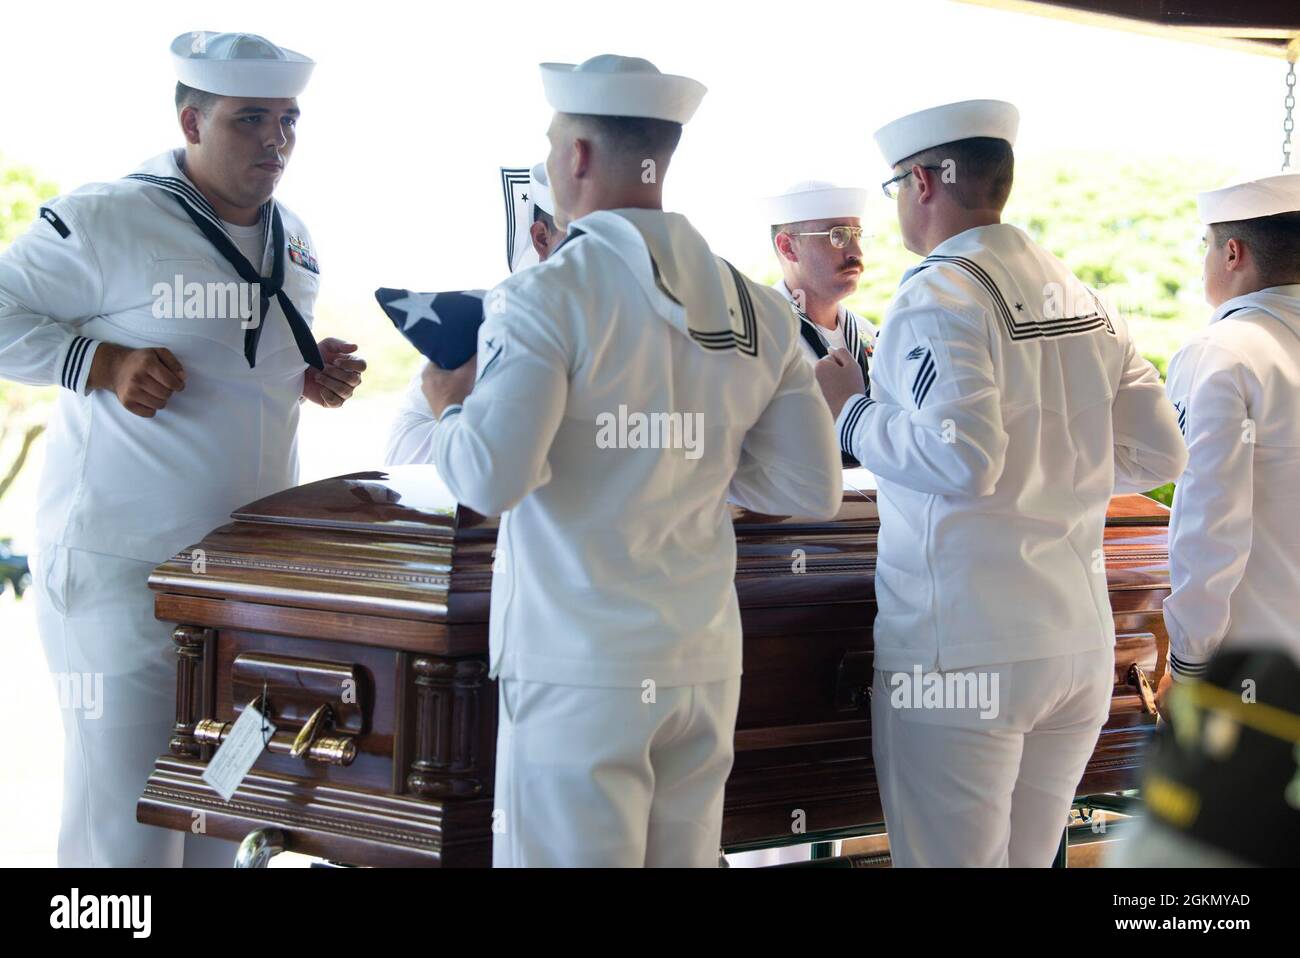 Sailors assigned to Navy Region Hawaii and the Defense POW/MIA Accounting Agency (DPAA) conduct a funeral for U.S. Navy Seaman 1st Class Camillus M. O’Grady, 19, of Greenleaf, Kansas, at the National Memorial Cemetery of the Pacific, Honolulu, Hawaii, June 1, 2021. O’Grady was assigned to the USS Oklahoma which sustained fire from Japanese aircraft and multiple torpedo hits causing the ship to capsize and resulted in the deaths of more than 400 crew members on Dec. 7, 1941, at Ford Island, Pearl Harbor. O’Grady was recently identified through DNA analysis by the DPAA forensic laboratory and la Stock Photo